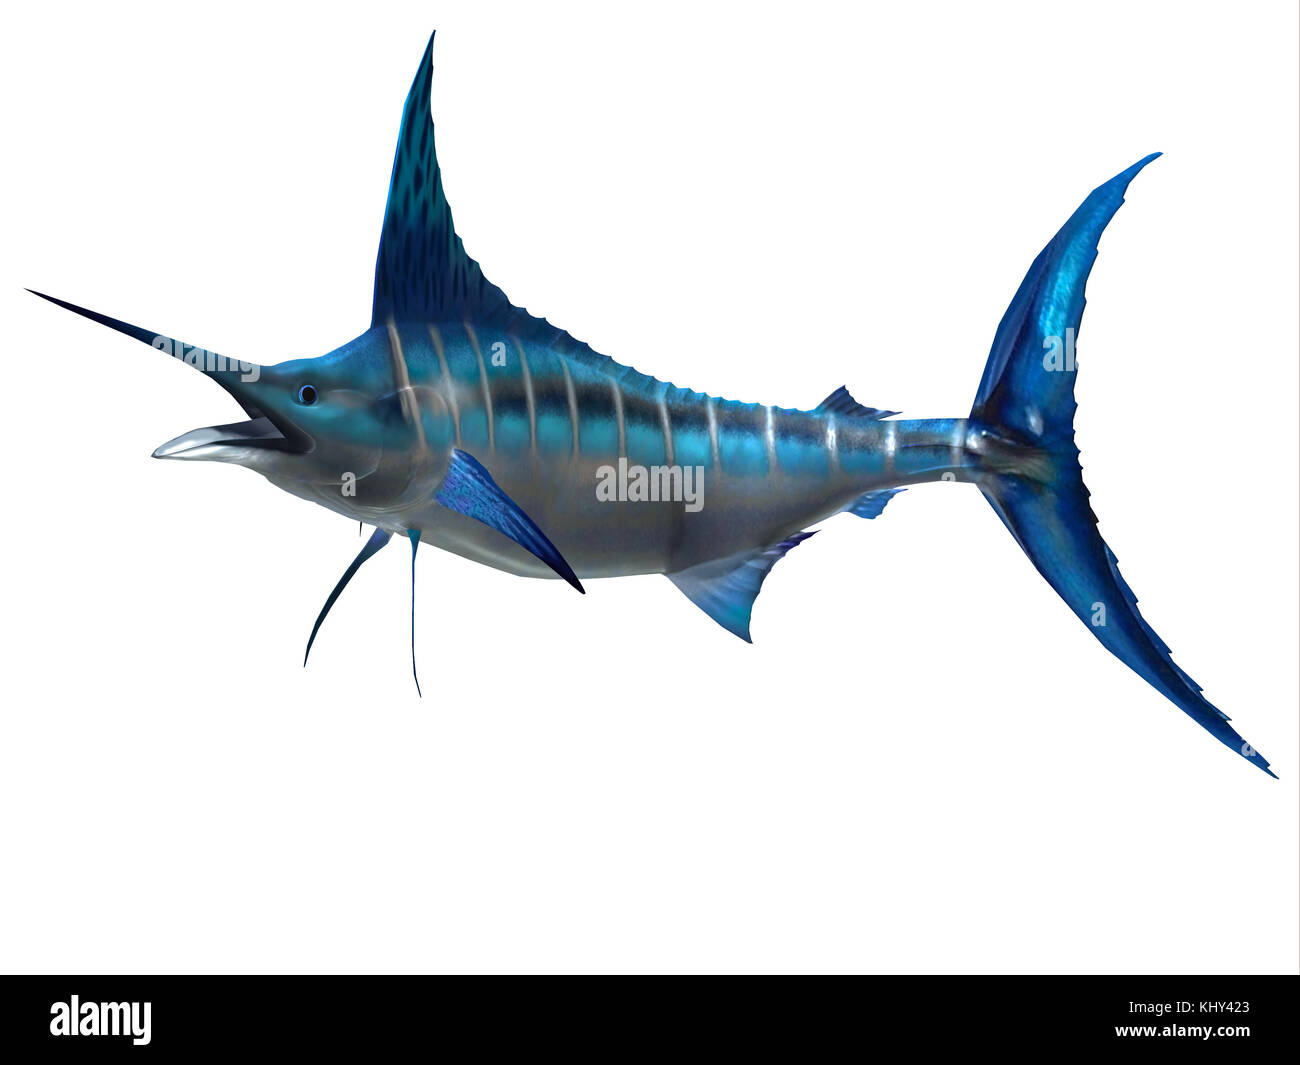 Marlin Sport Fish - The Blue Marlin is a favorite fish of sport fishermen and one of the predators of the Atlantic and Pacific oceans. Stock Photo